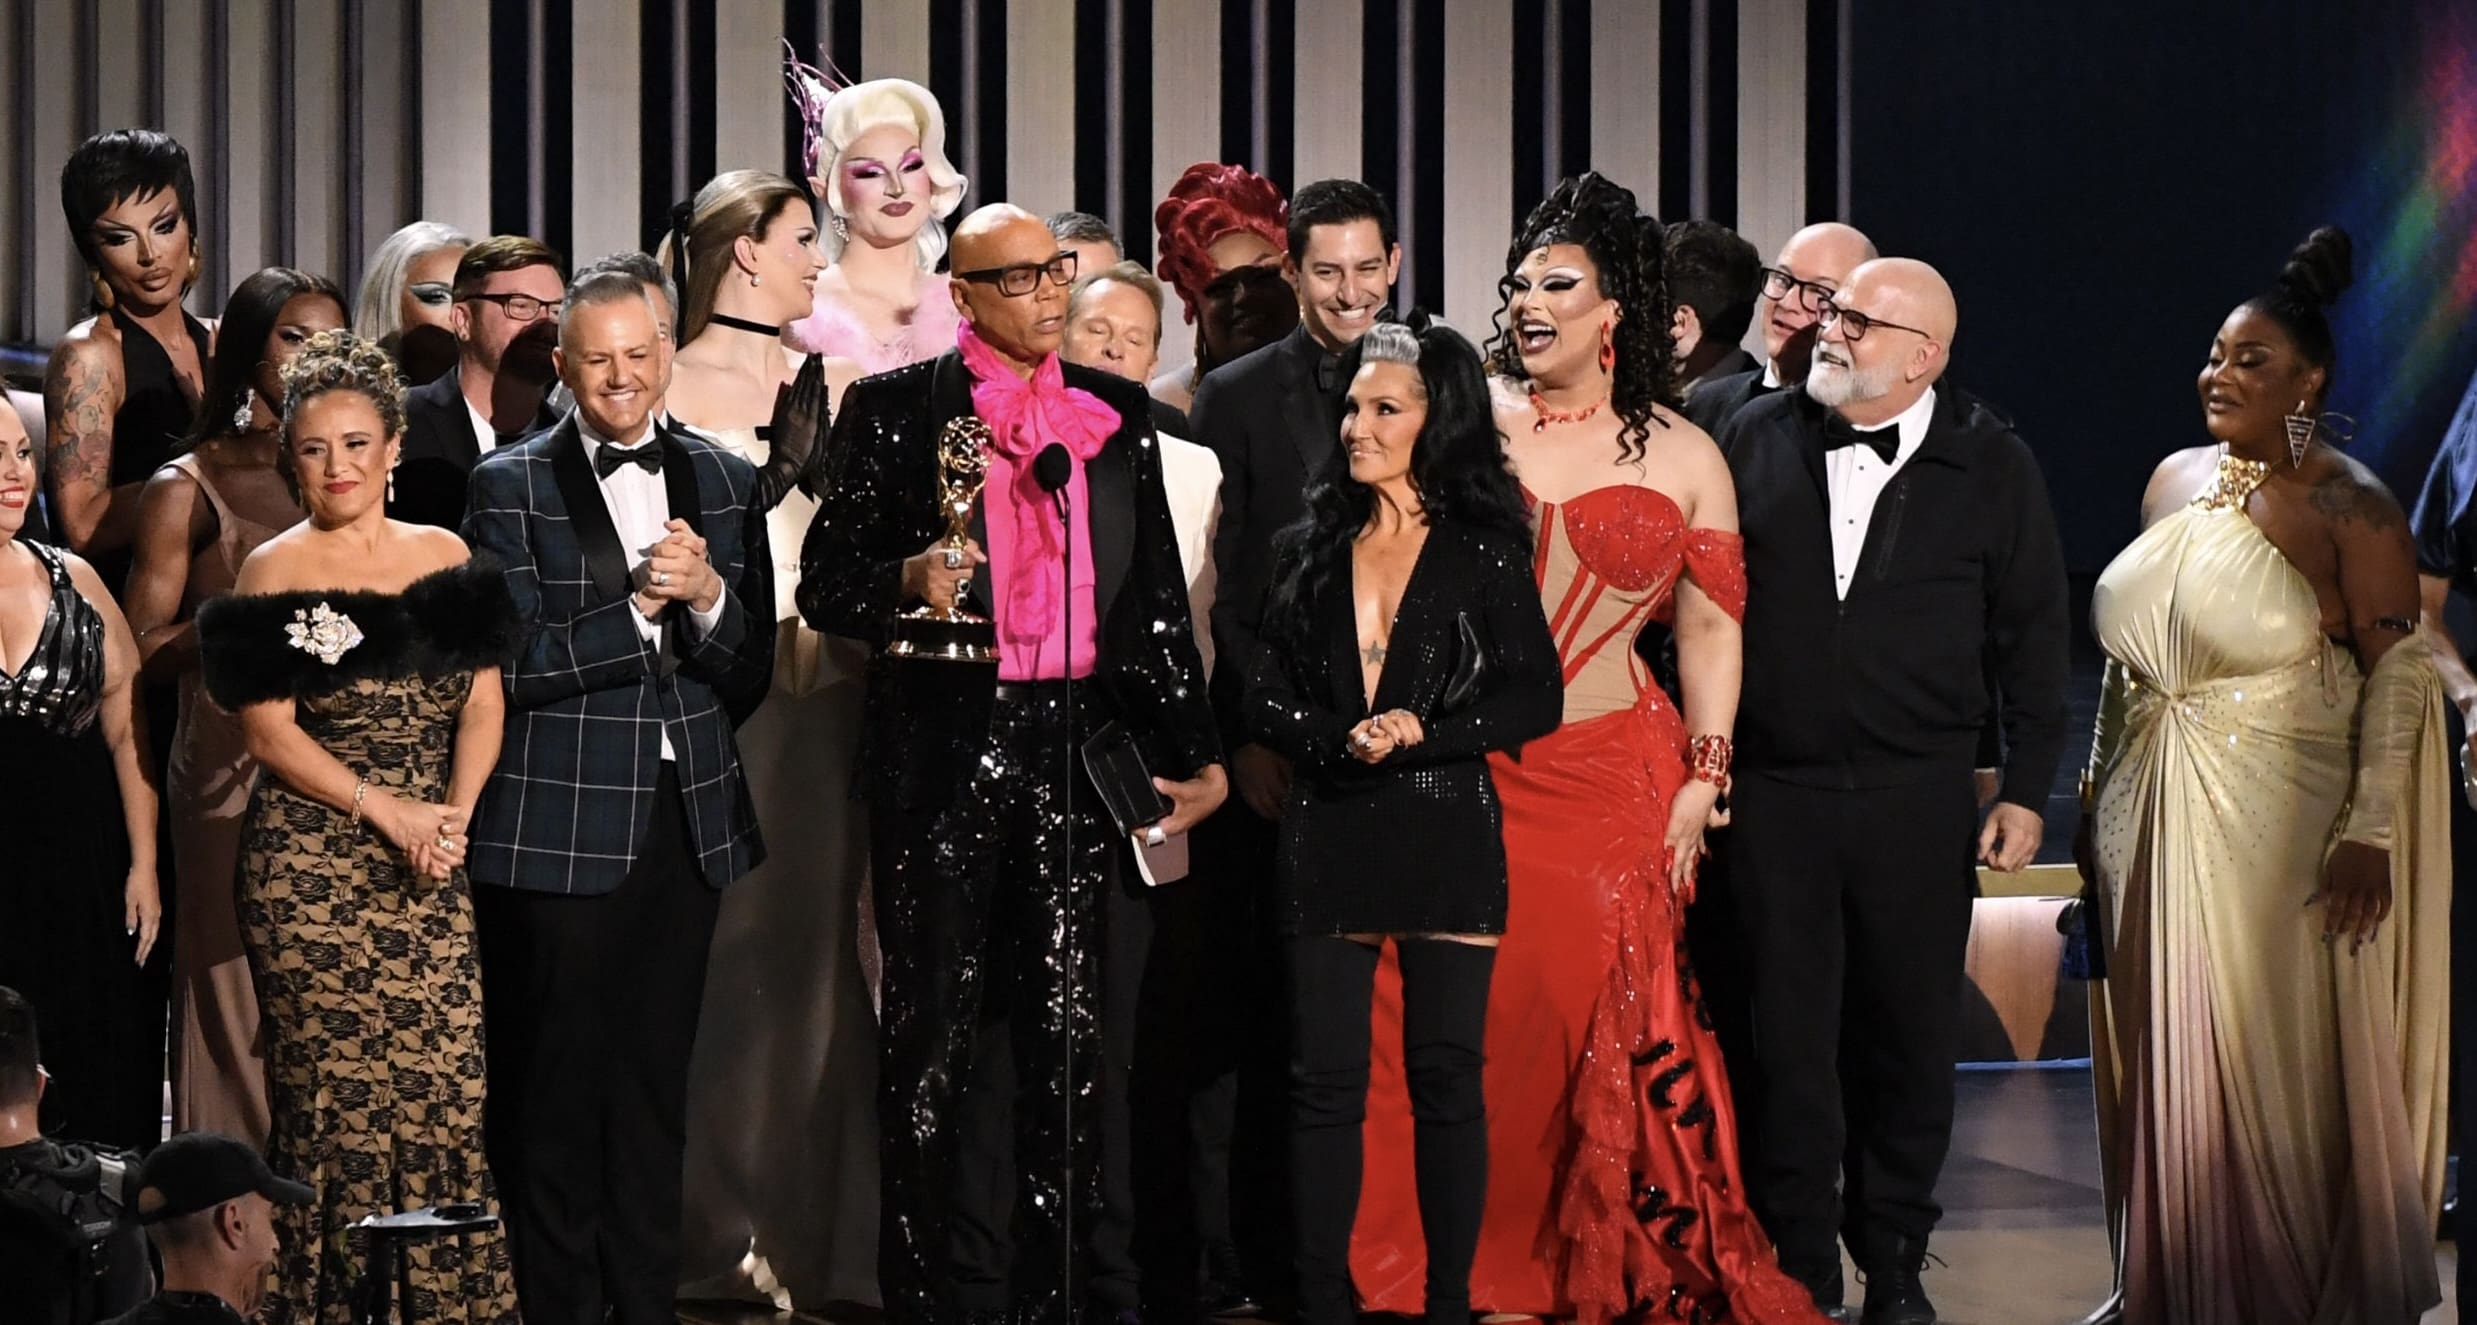 ‘RuPaul’s Drag Race’ Takes The Emmy Again For Outstanding Reality TV Competition Program